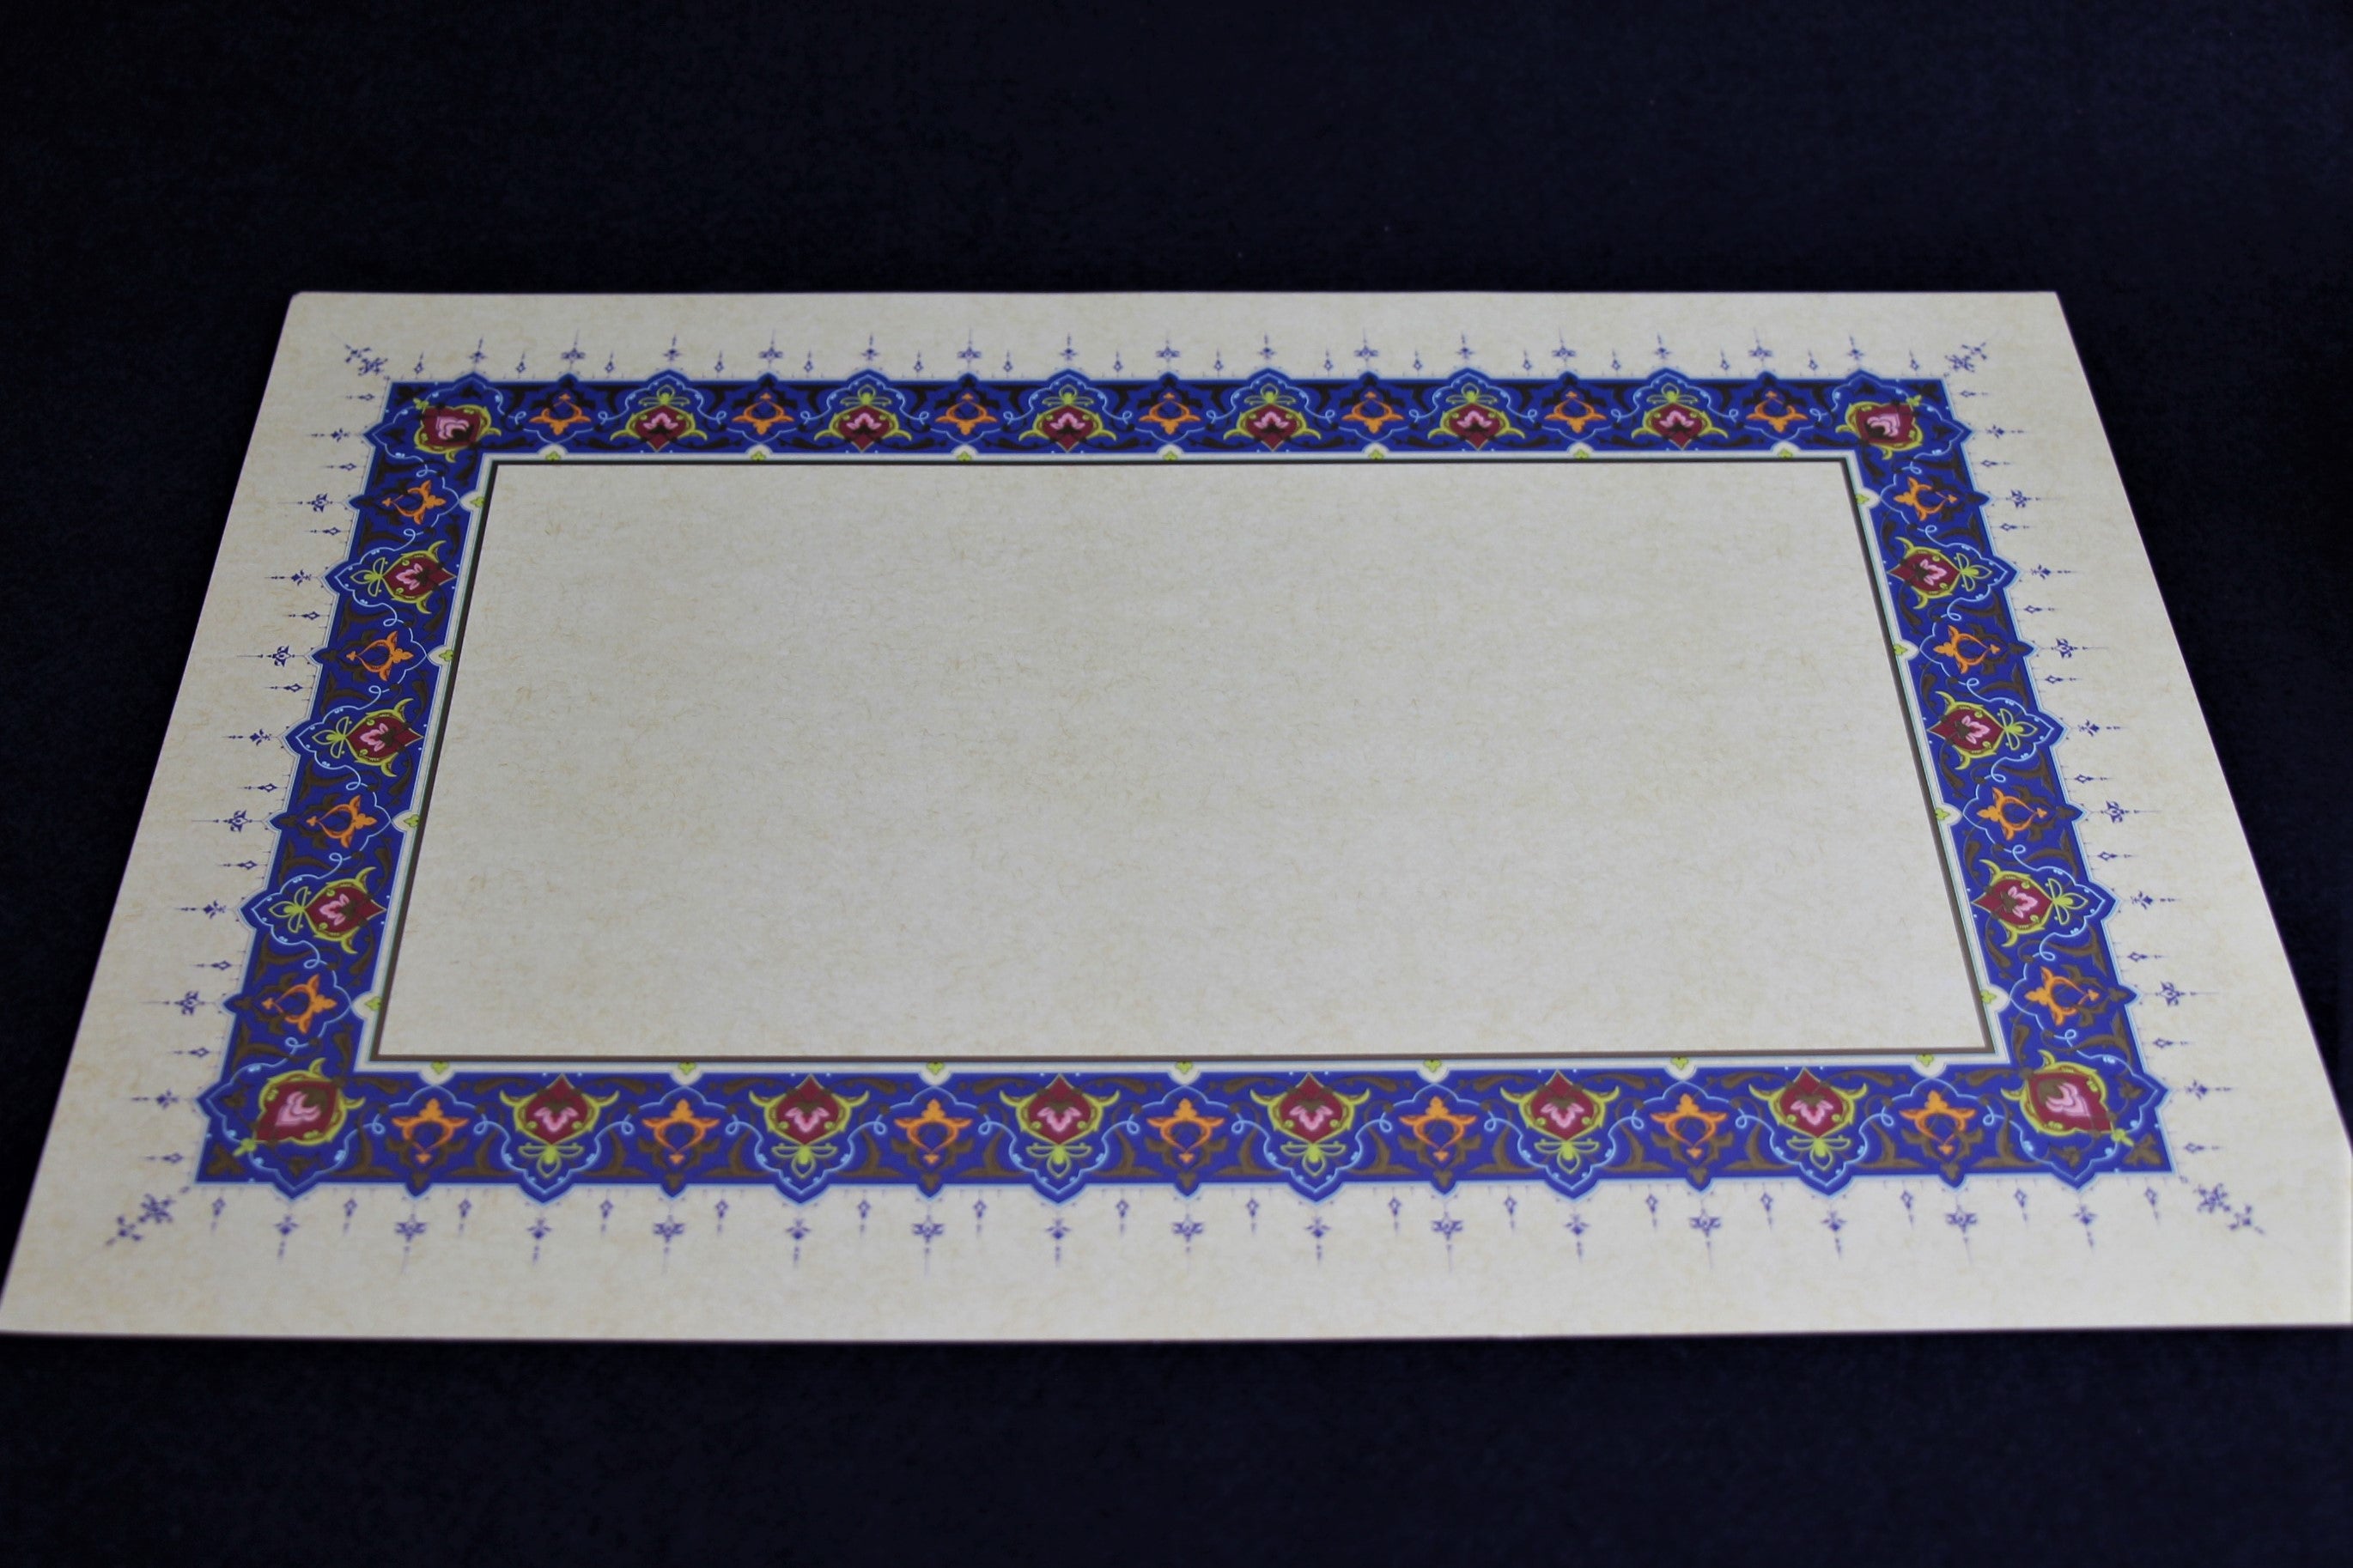 Loose sheets of paper with illuminated borders - 5